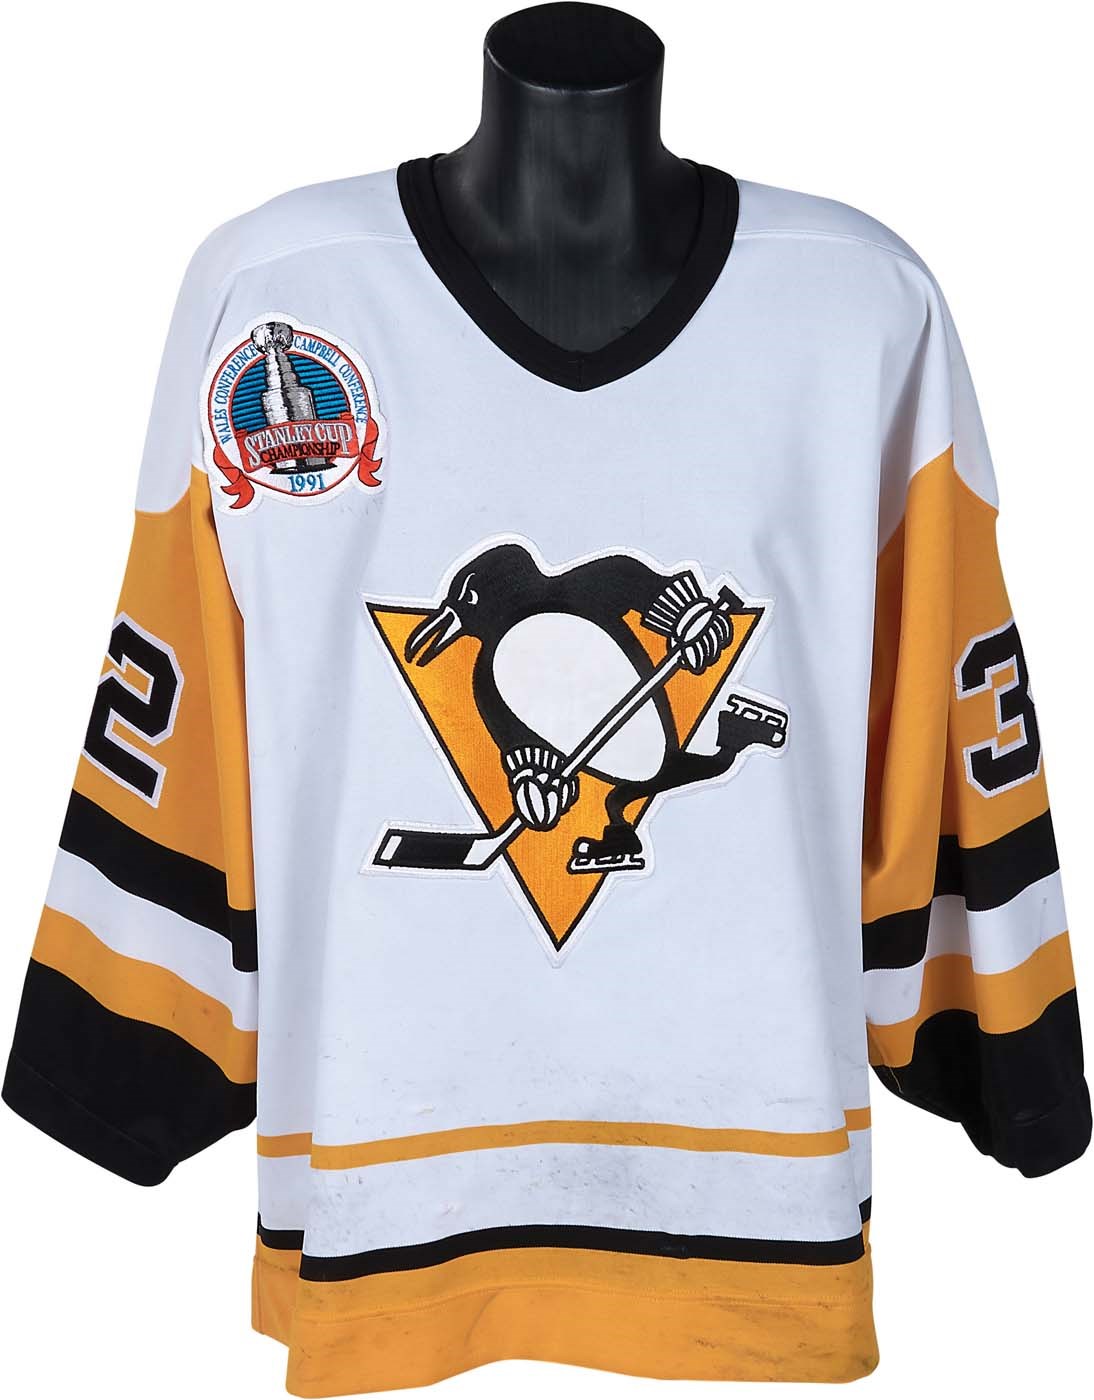 Hockey - 1991 Peter Taglianetti Stanley Cup Finals Game Worn Penguins Jersey (Photo-Matched)